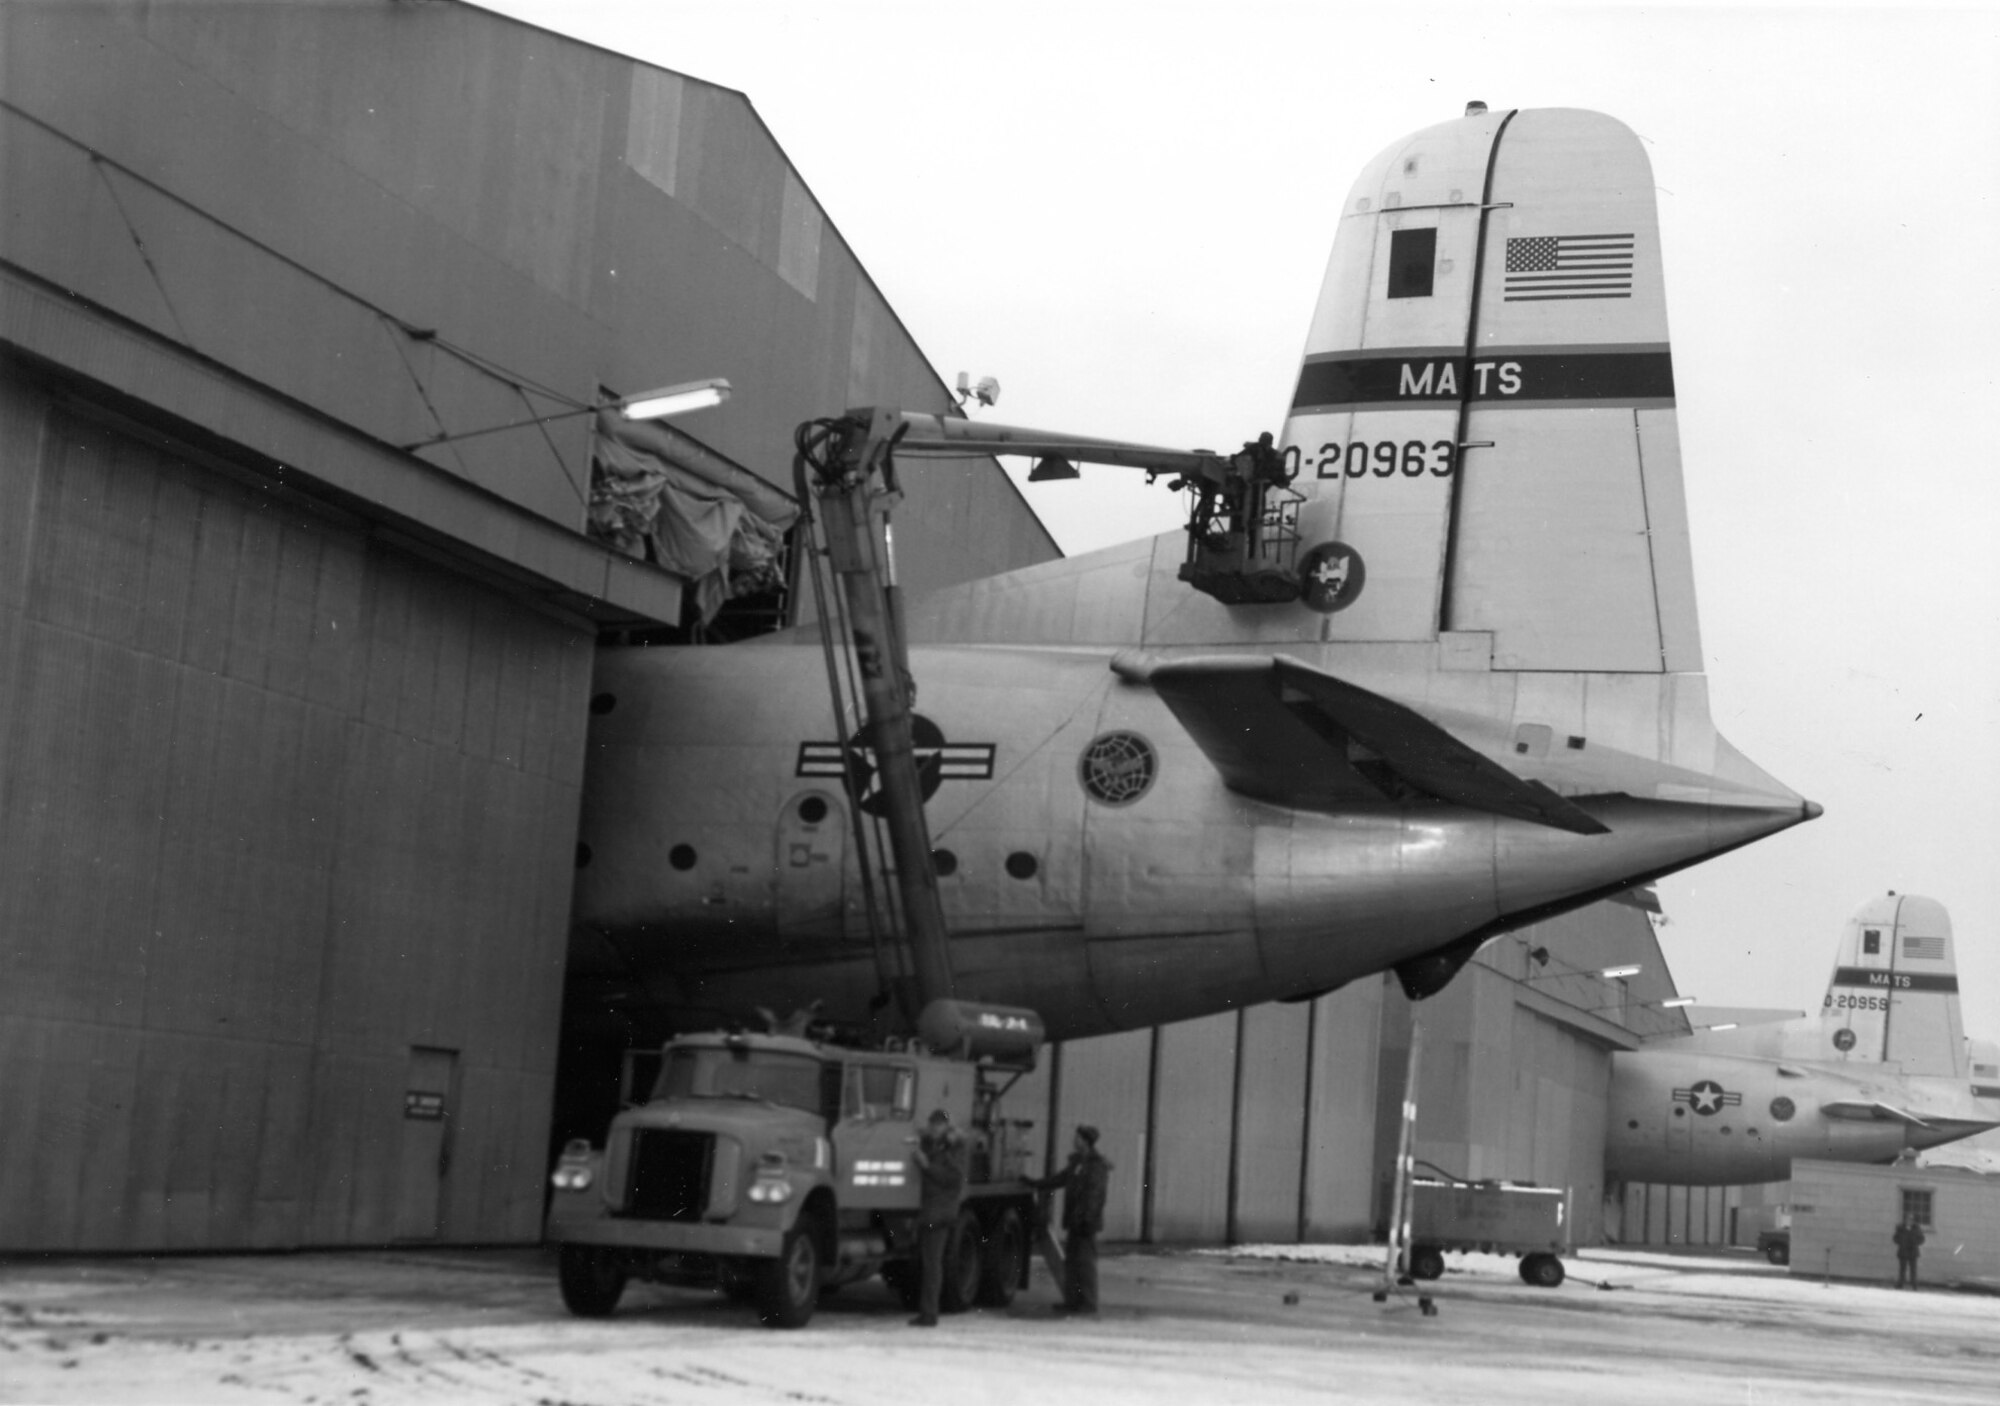 The 28th Military Airlift Squadron’s C-124s received maintenance in nose dock facilities at Hill AFB.